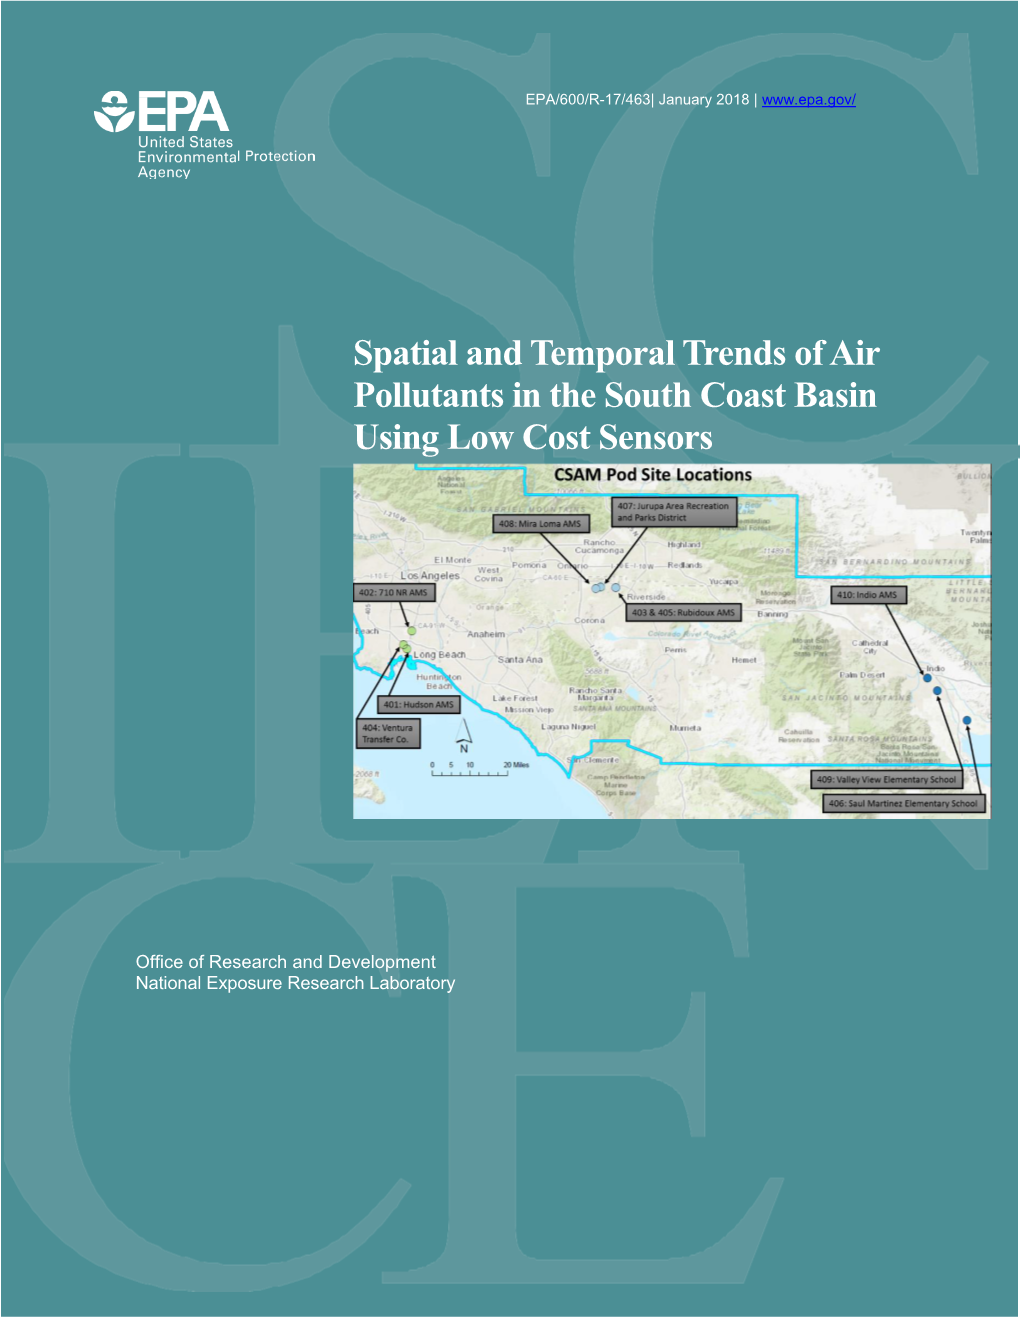 Spatial and Temporal Trends of Air Pollutants in the South Coast Basin Using Low Cost Sensors